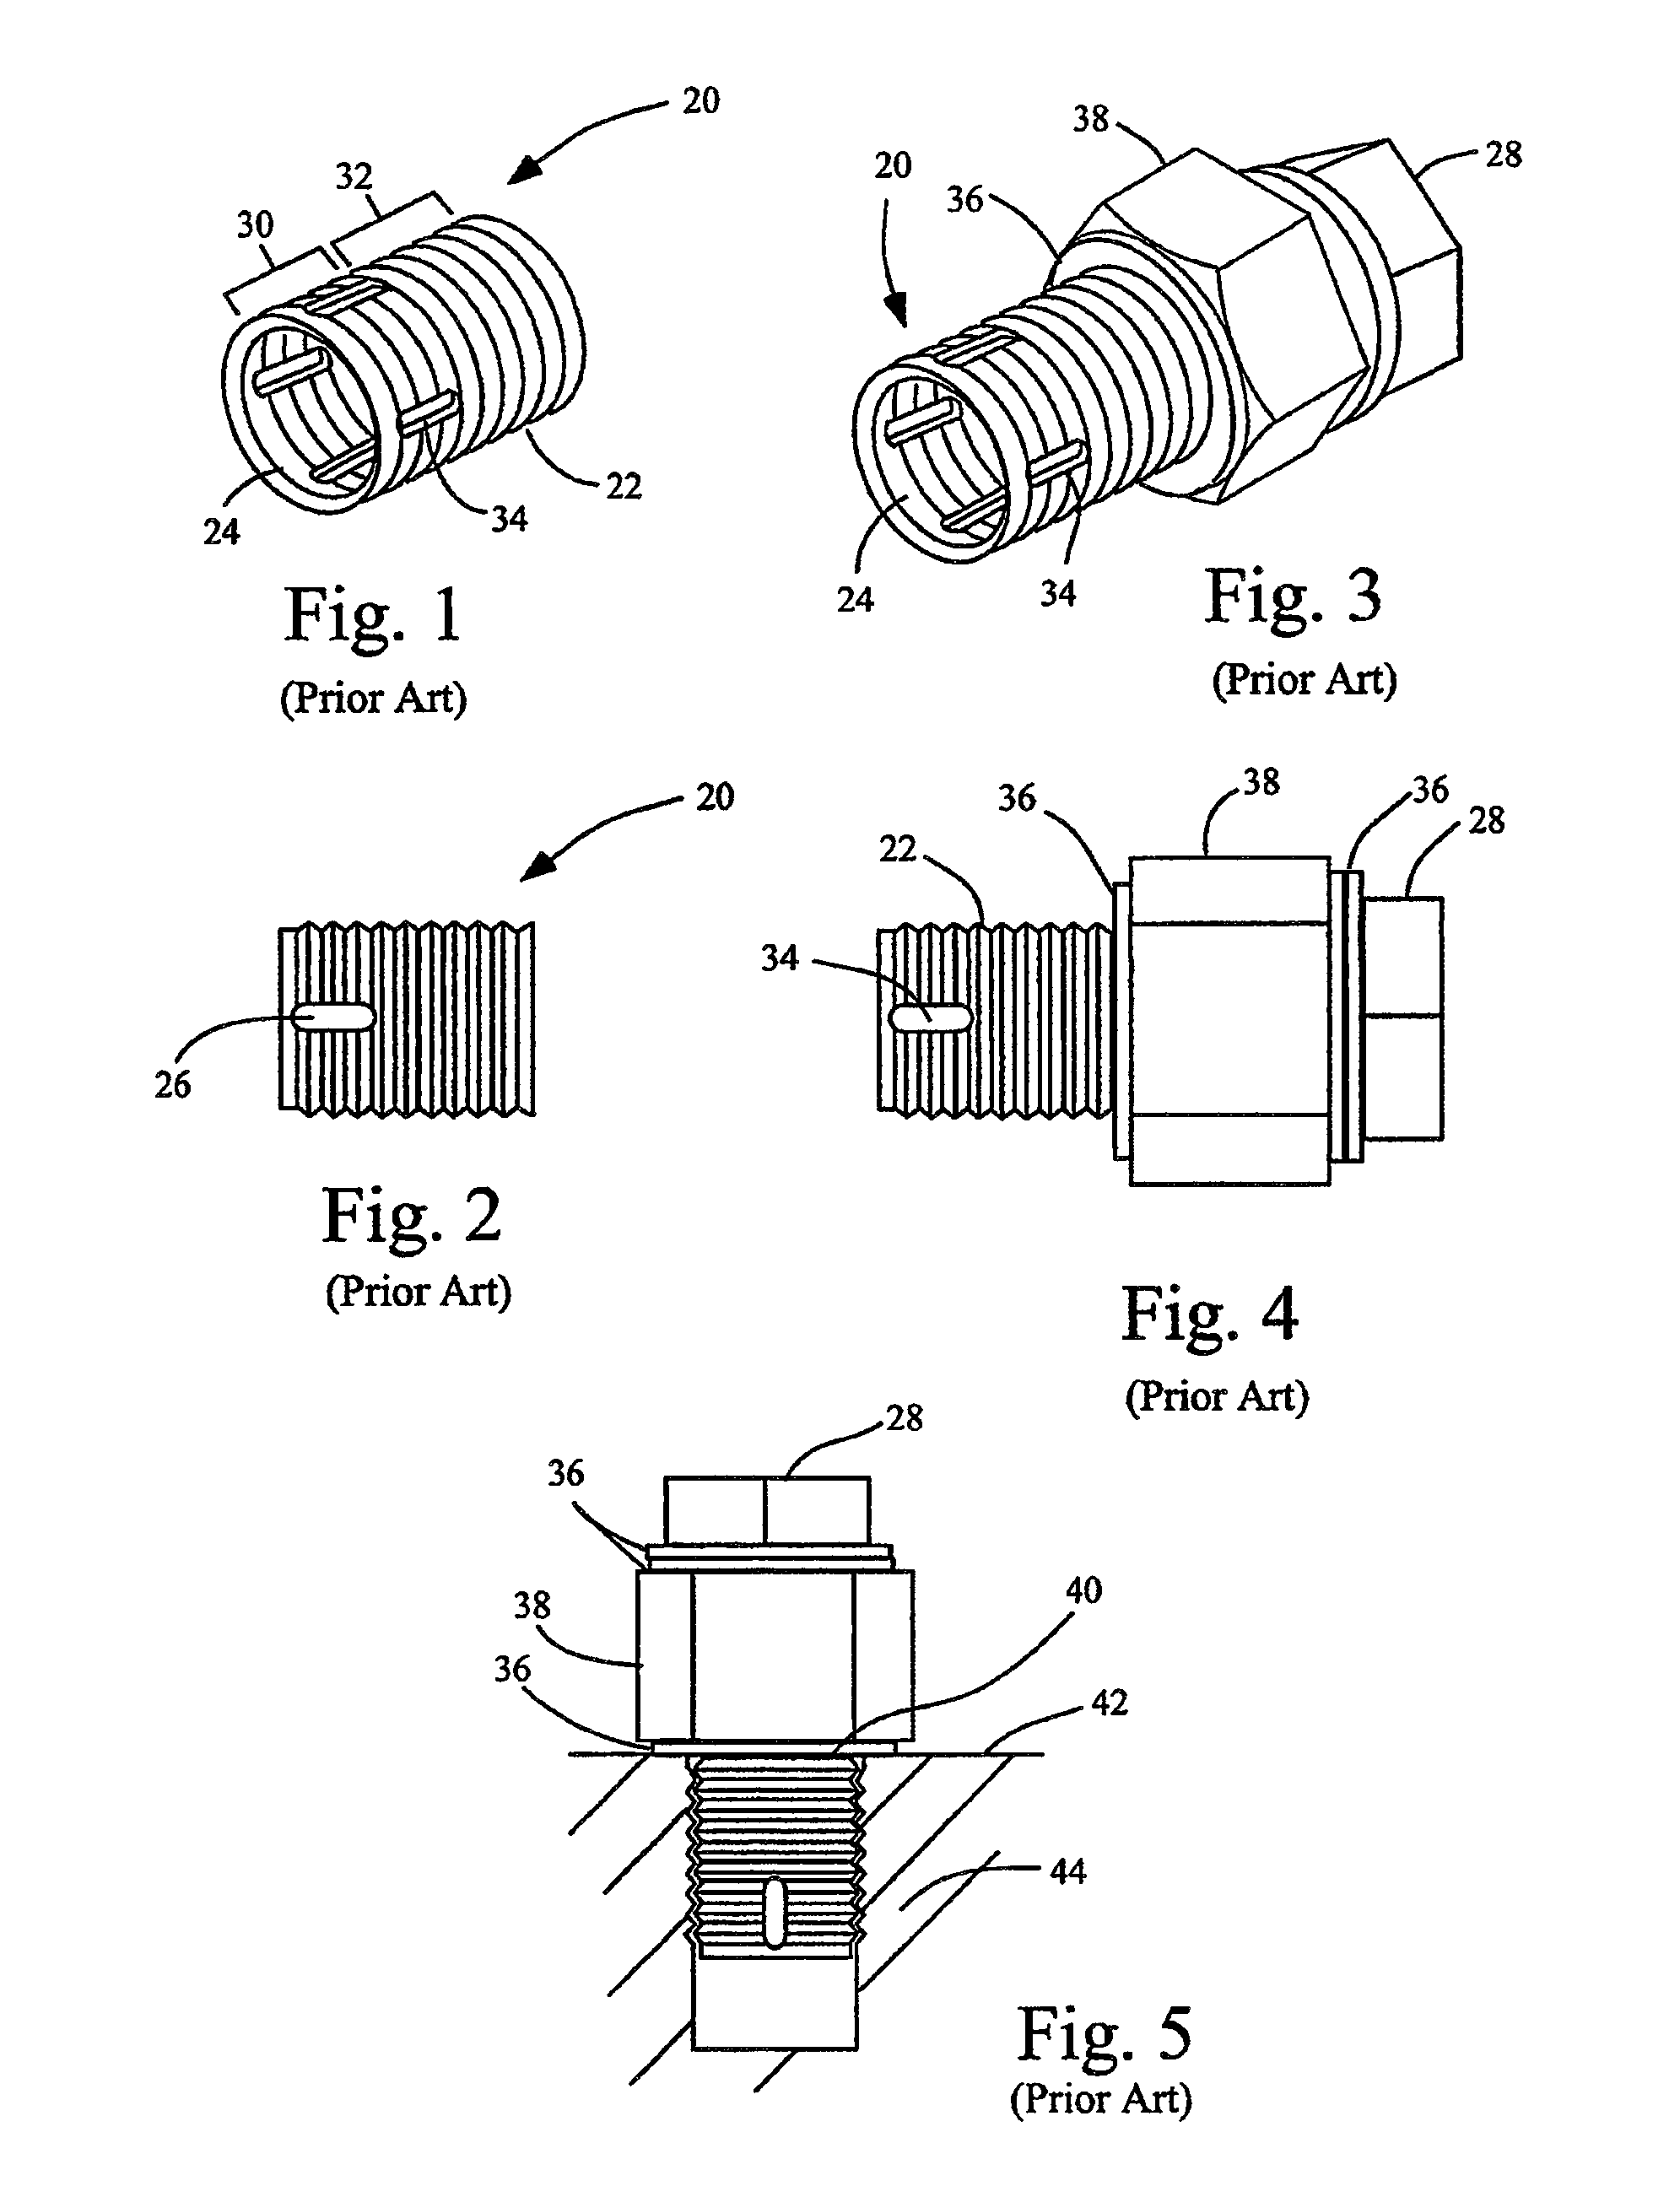 Self-tapping and self-aligning insert to replace damaged threads